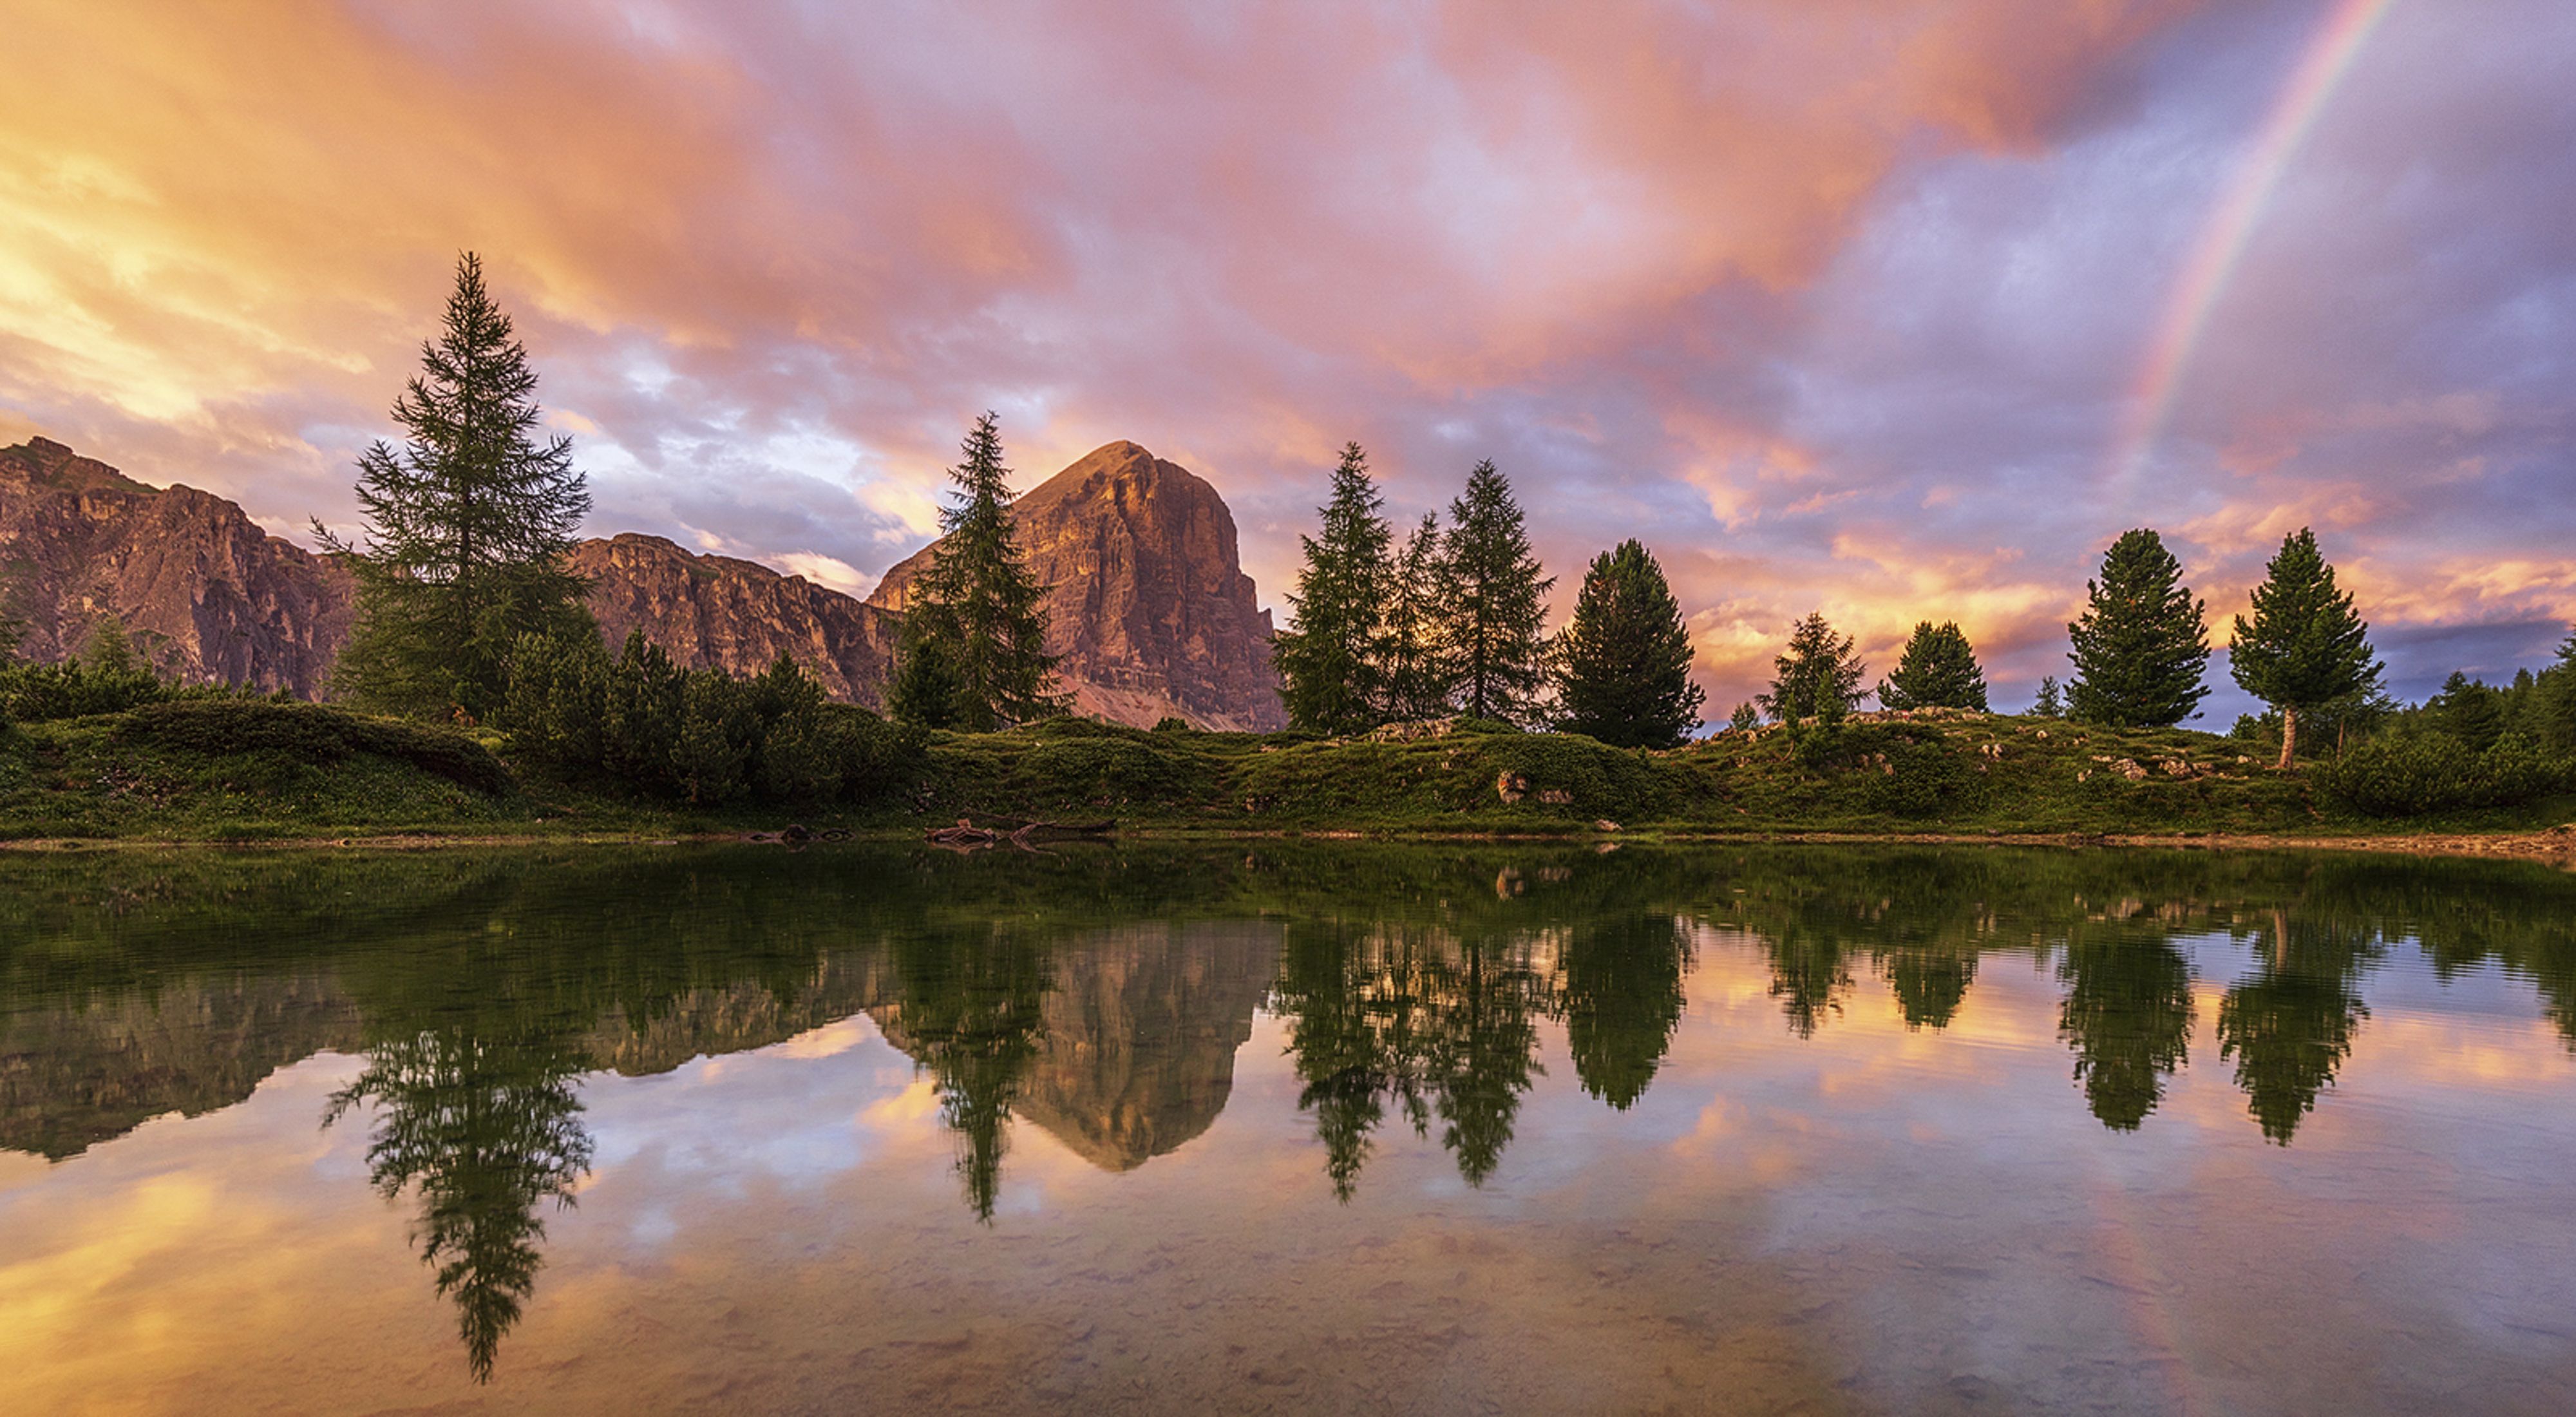 sparse evergreen trees and rocky outcroppings and a rainbow reflected in a still lake at sunset